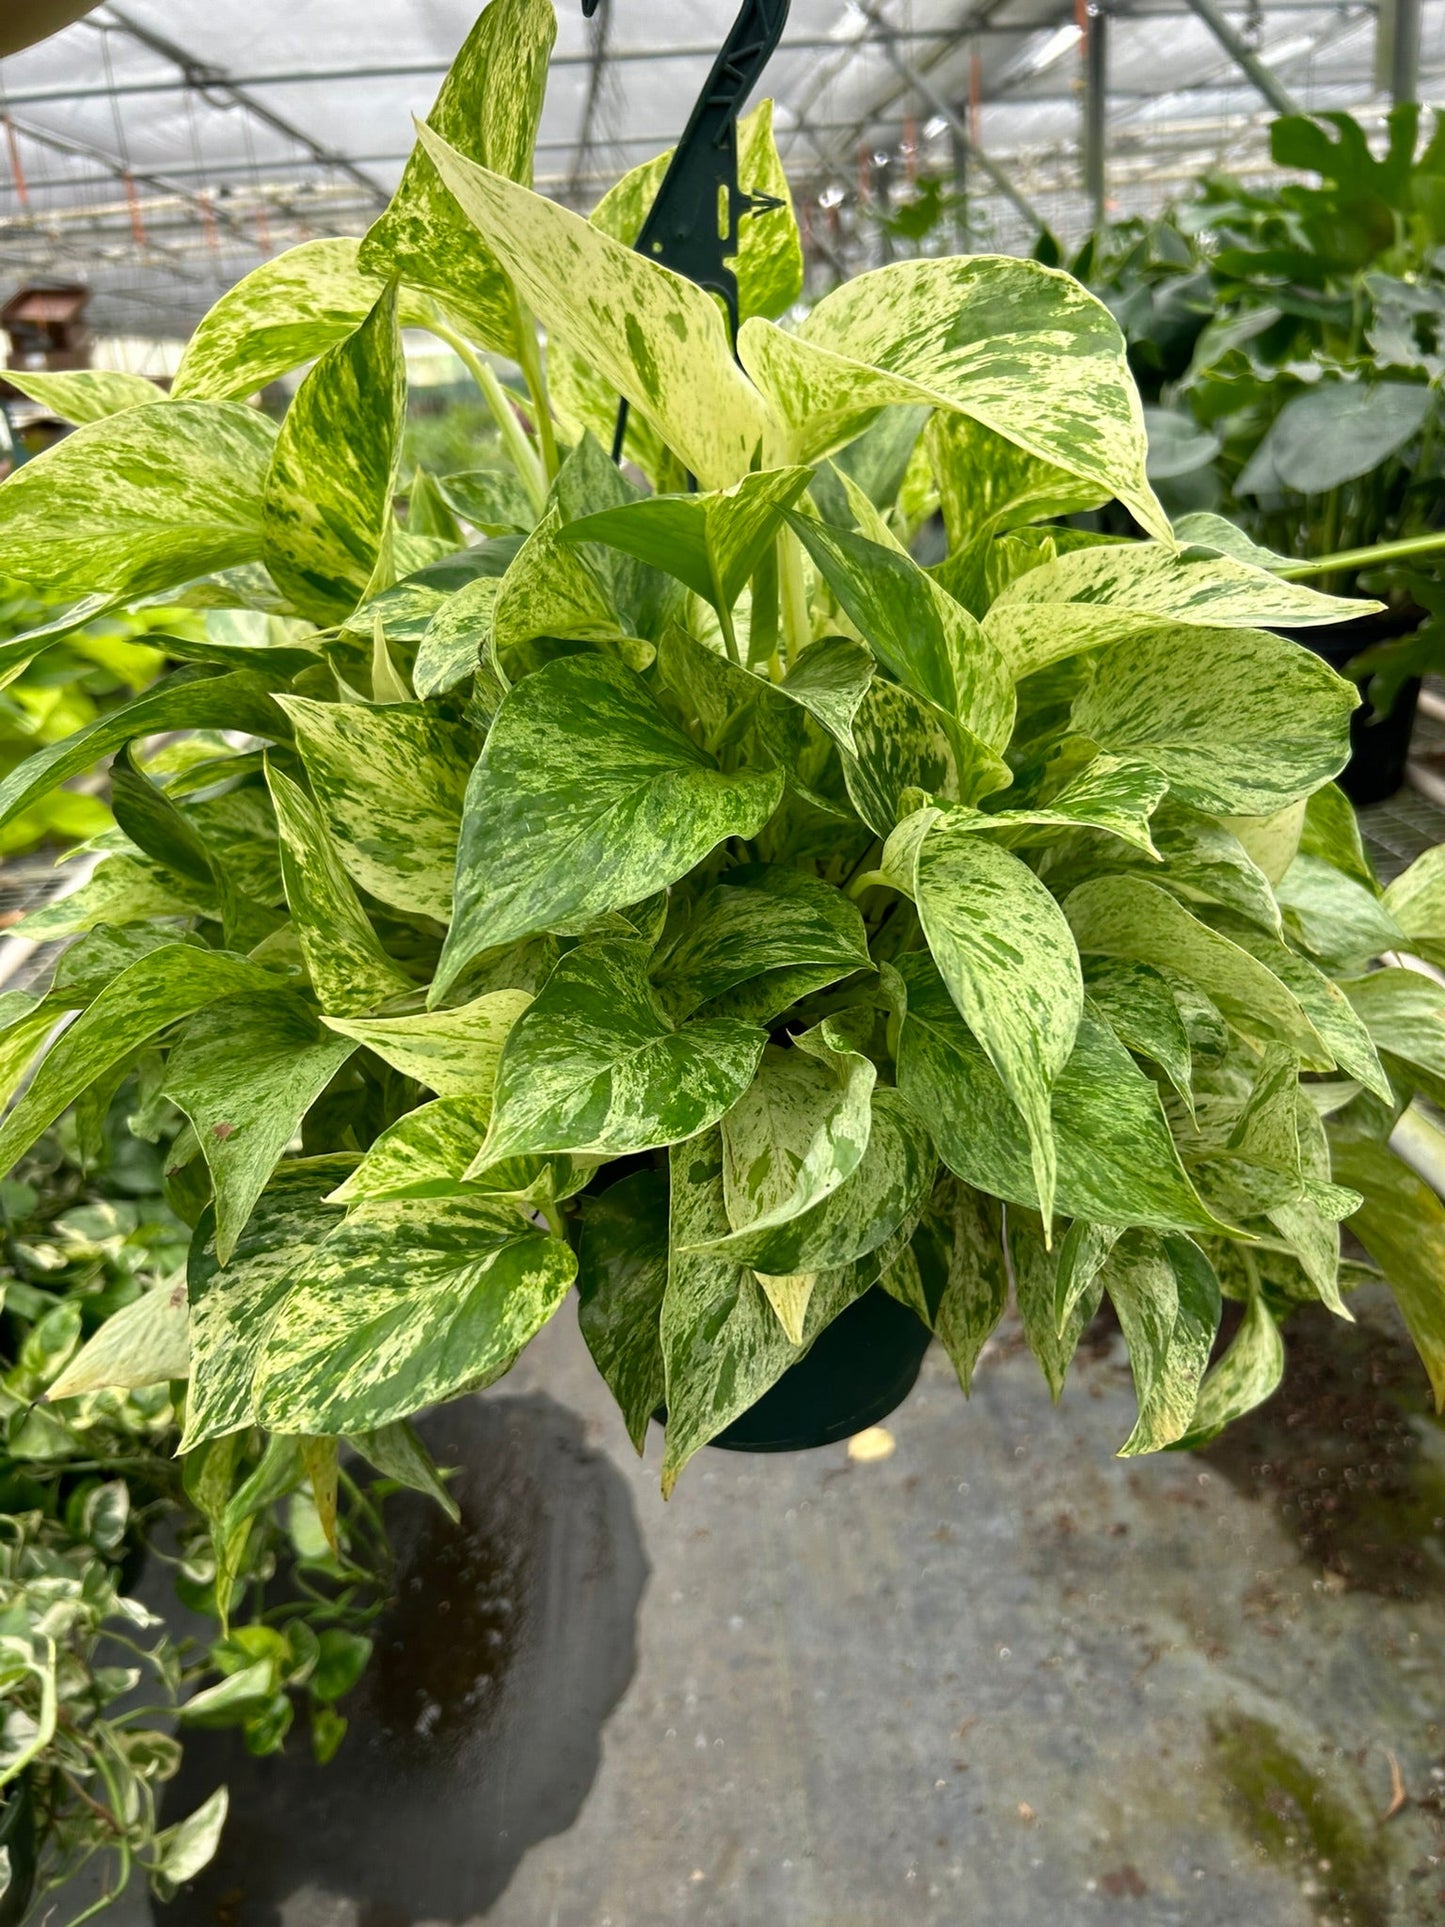 Epipremnum Aureum 'Marble Queen' Pothos- 🌱 Beginner-Friendly, Beautiful Trailing, Air Purifying, Extremely Low Maintenance Tropical Houseplant (3 Inch, 4 Inch, 6 Inch)